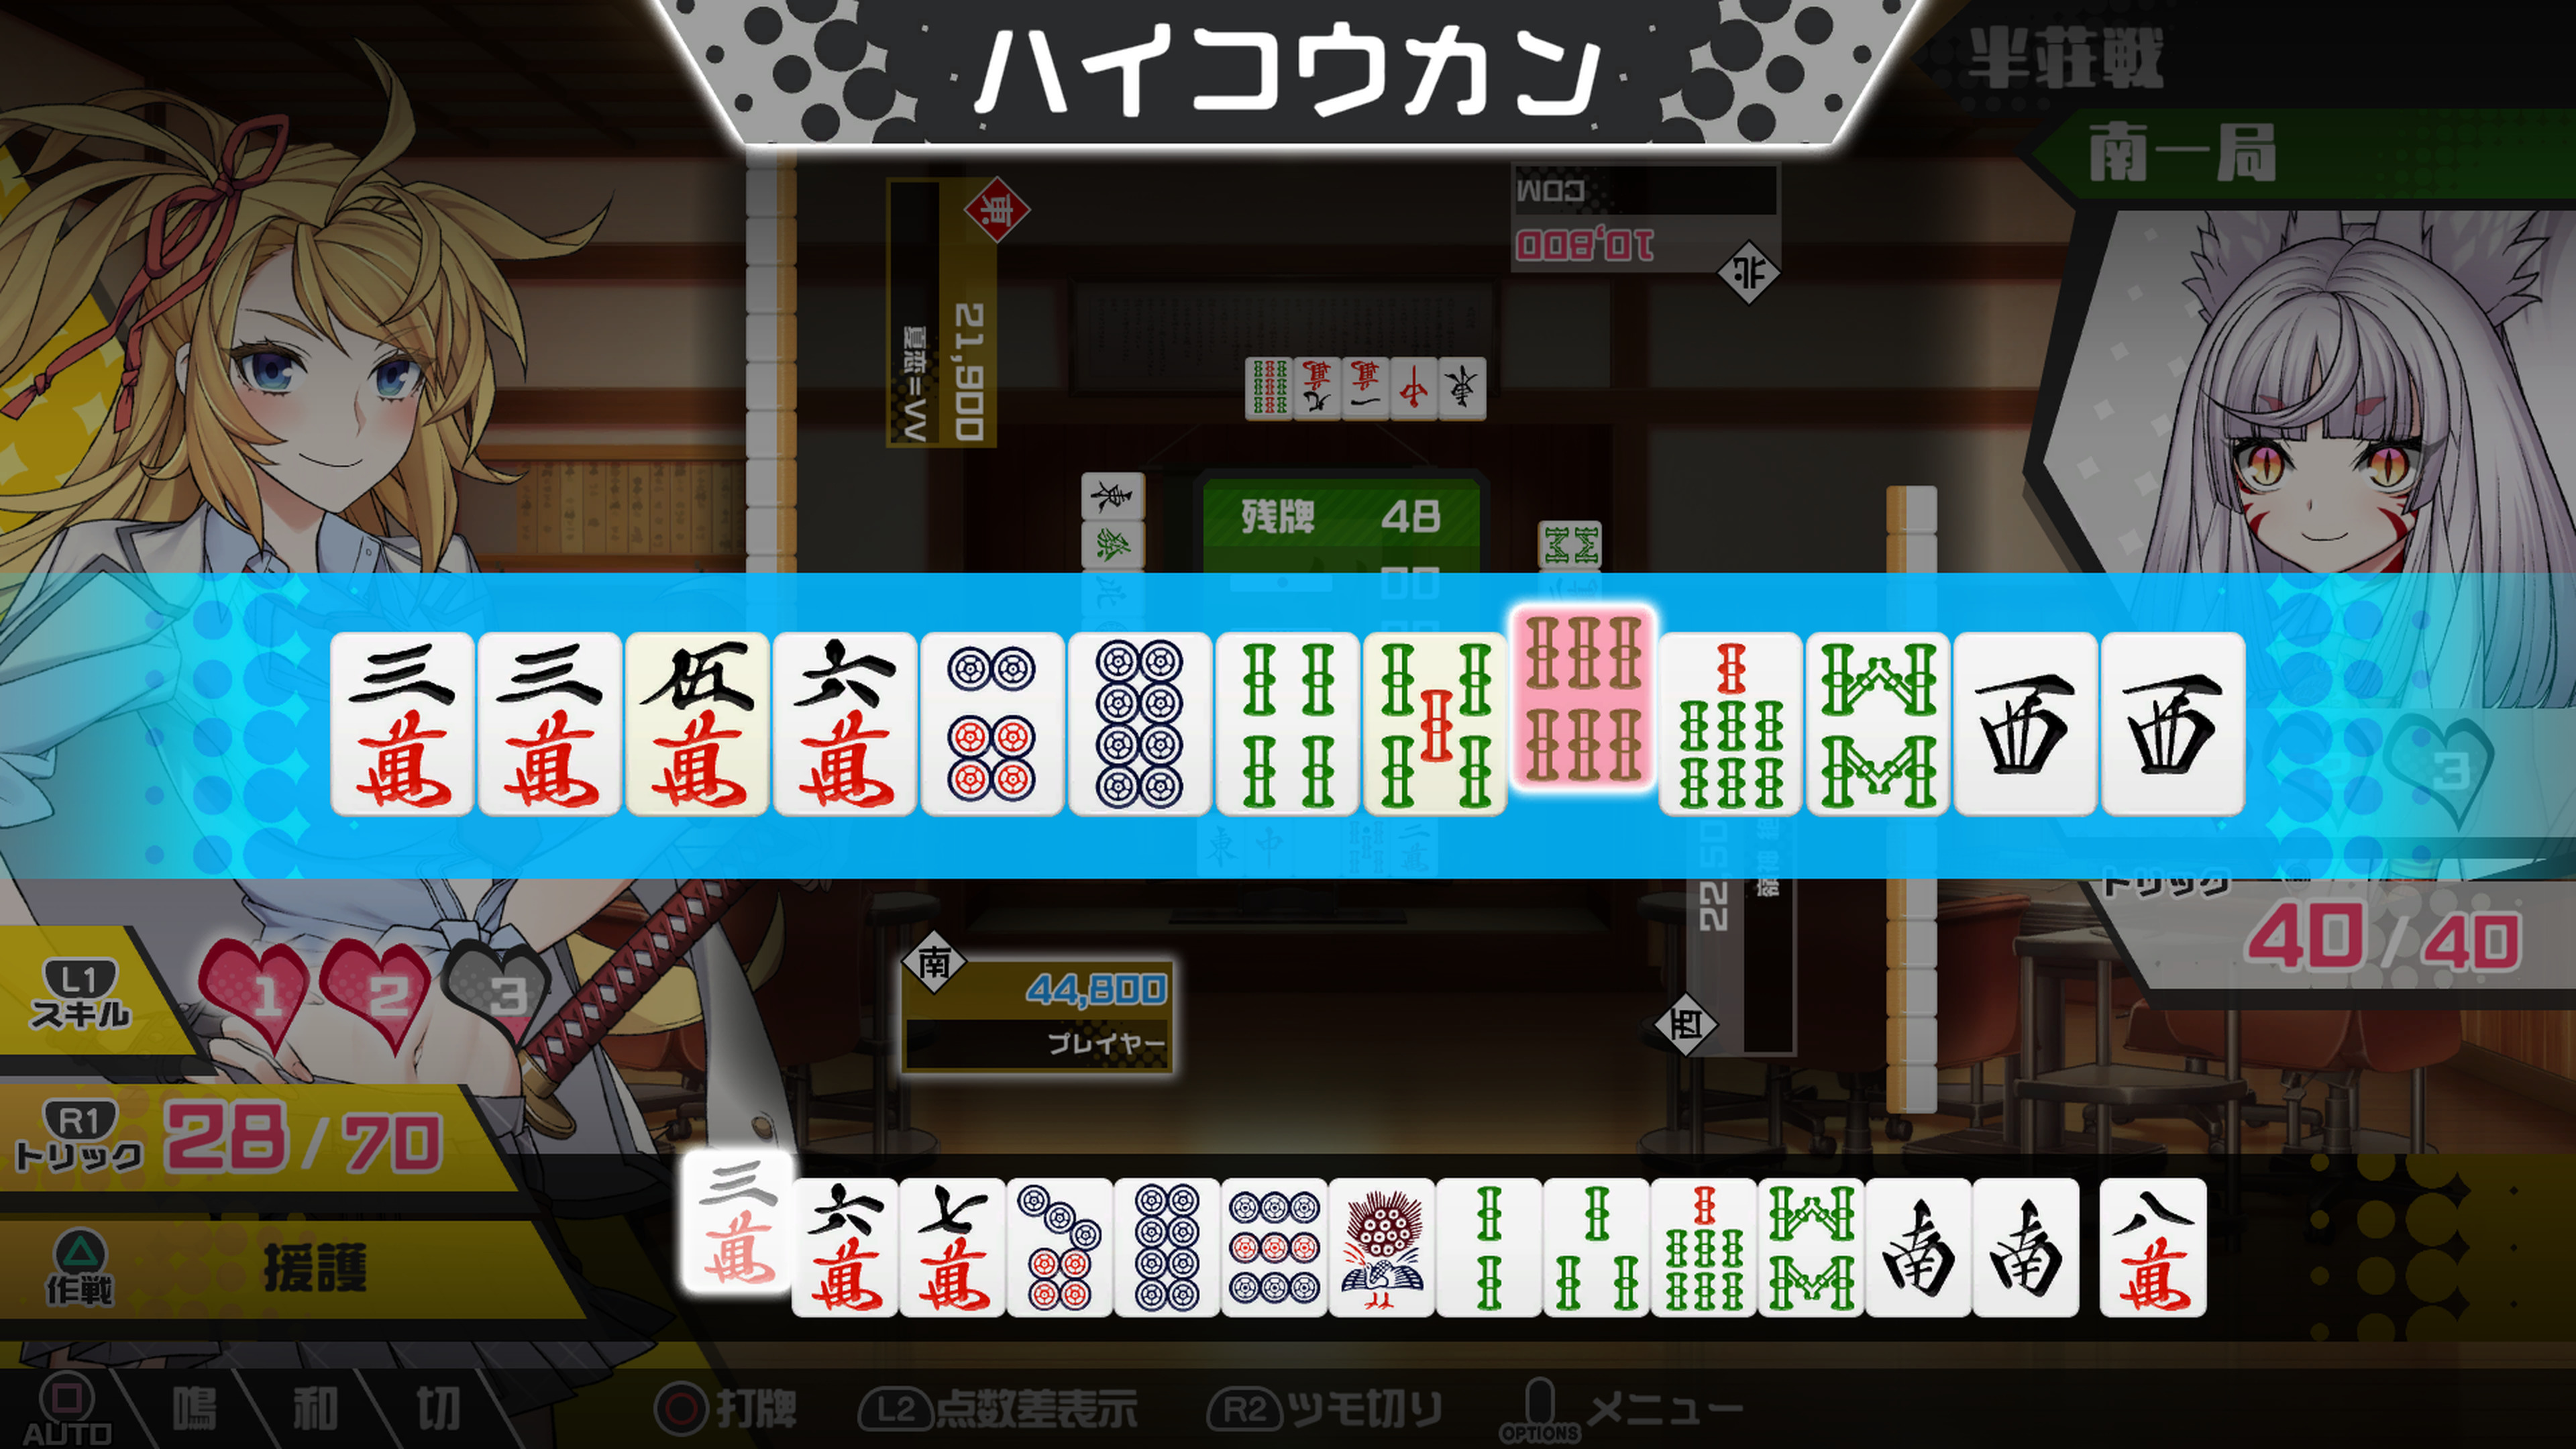 Mahjong Solitaire Refresh, PC Steam Game